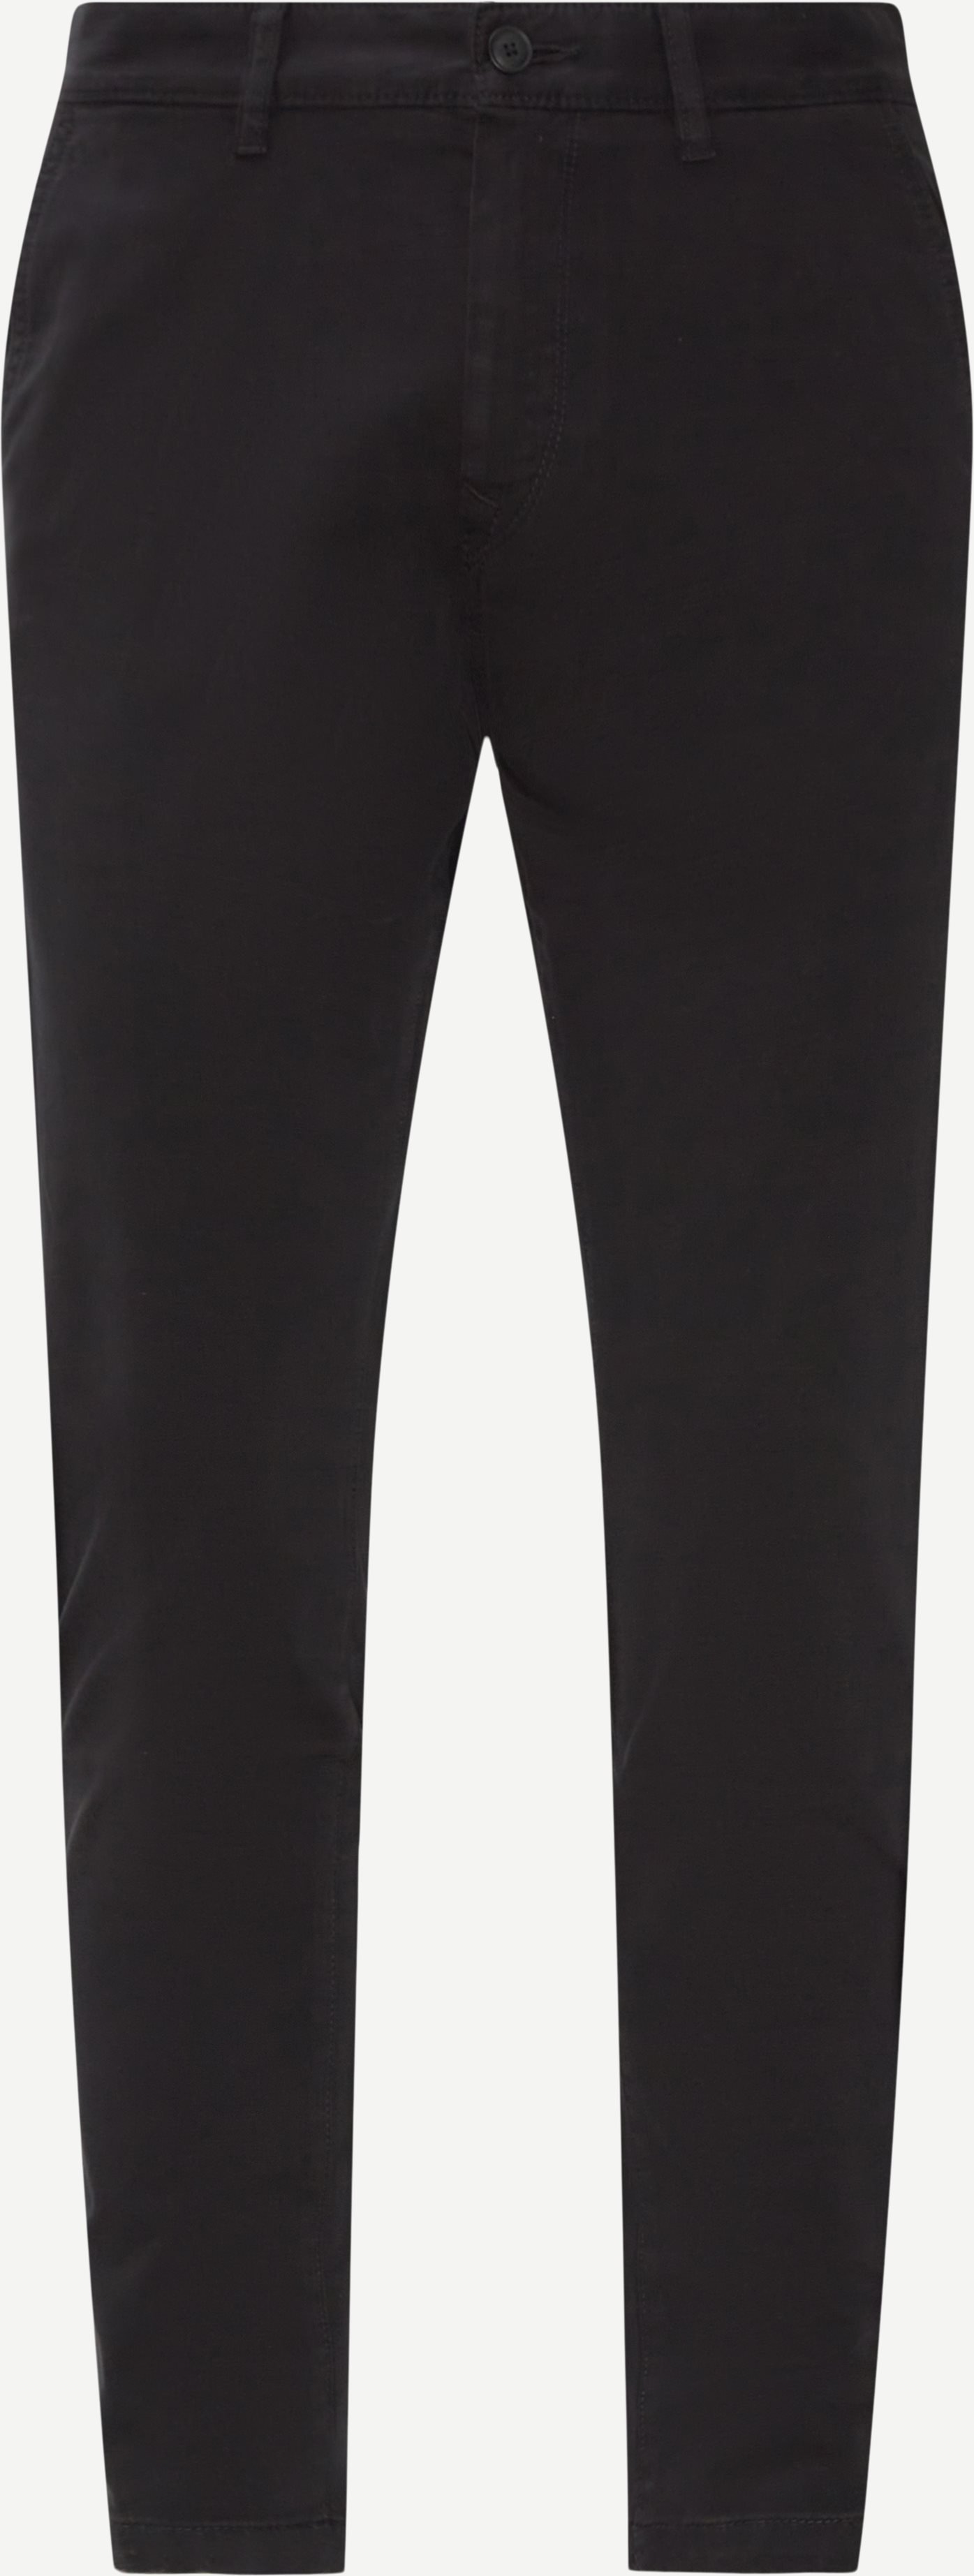 Trousers - Tapered fit - Black